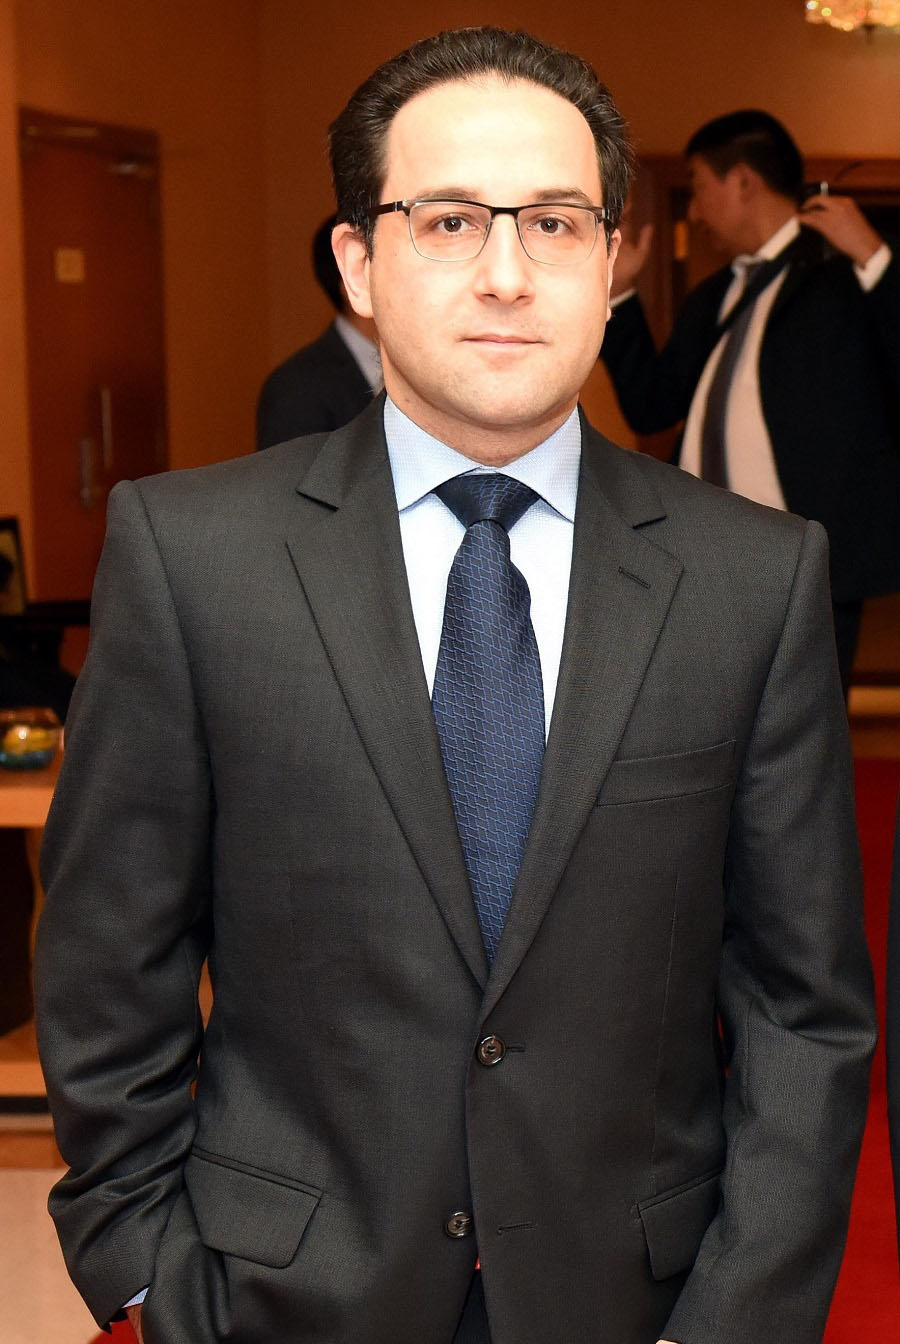 Khaled-Abou-Zahr-founder-of-the-Private-Equity-Forum.jpg